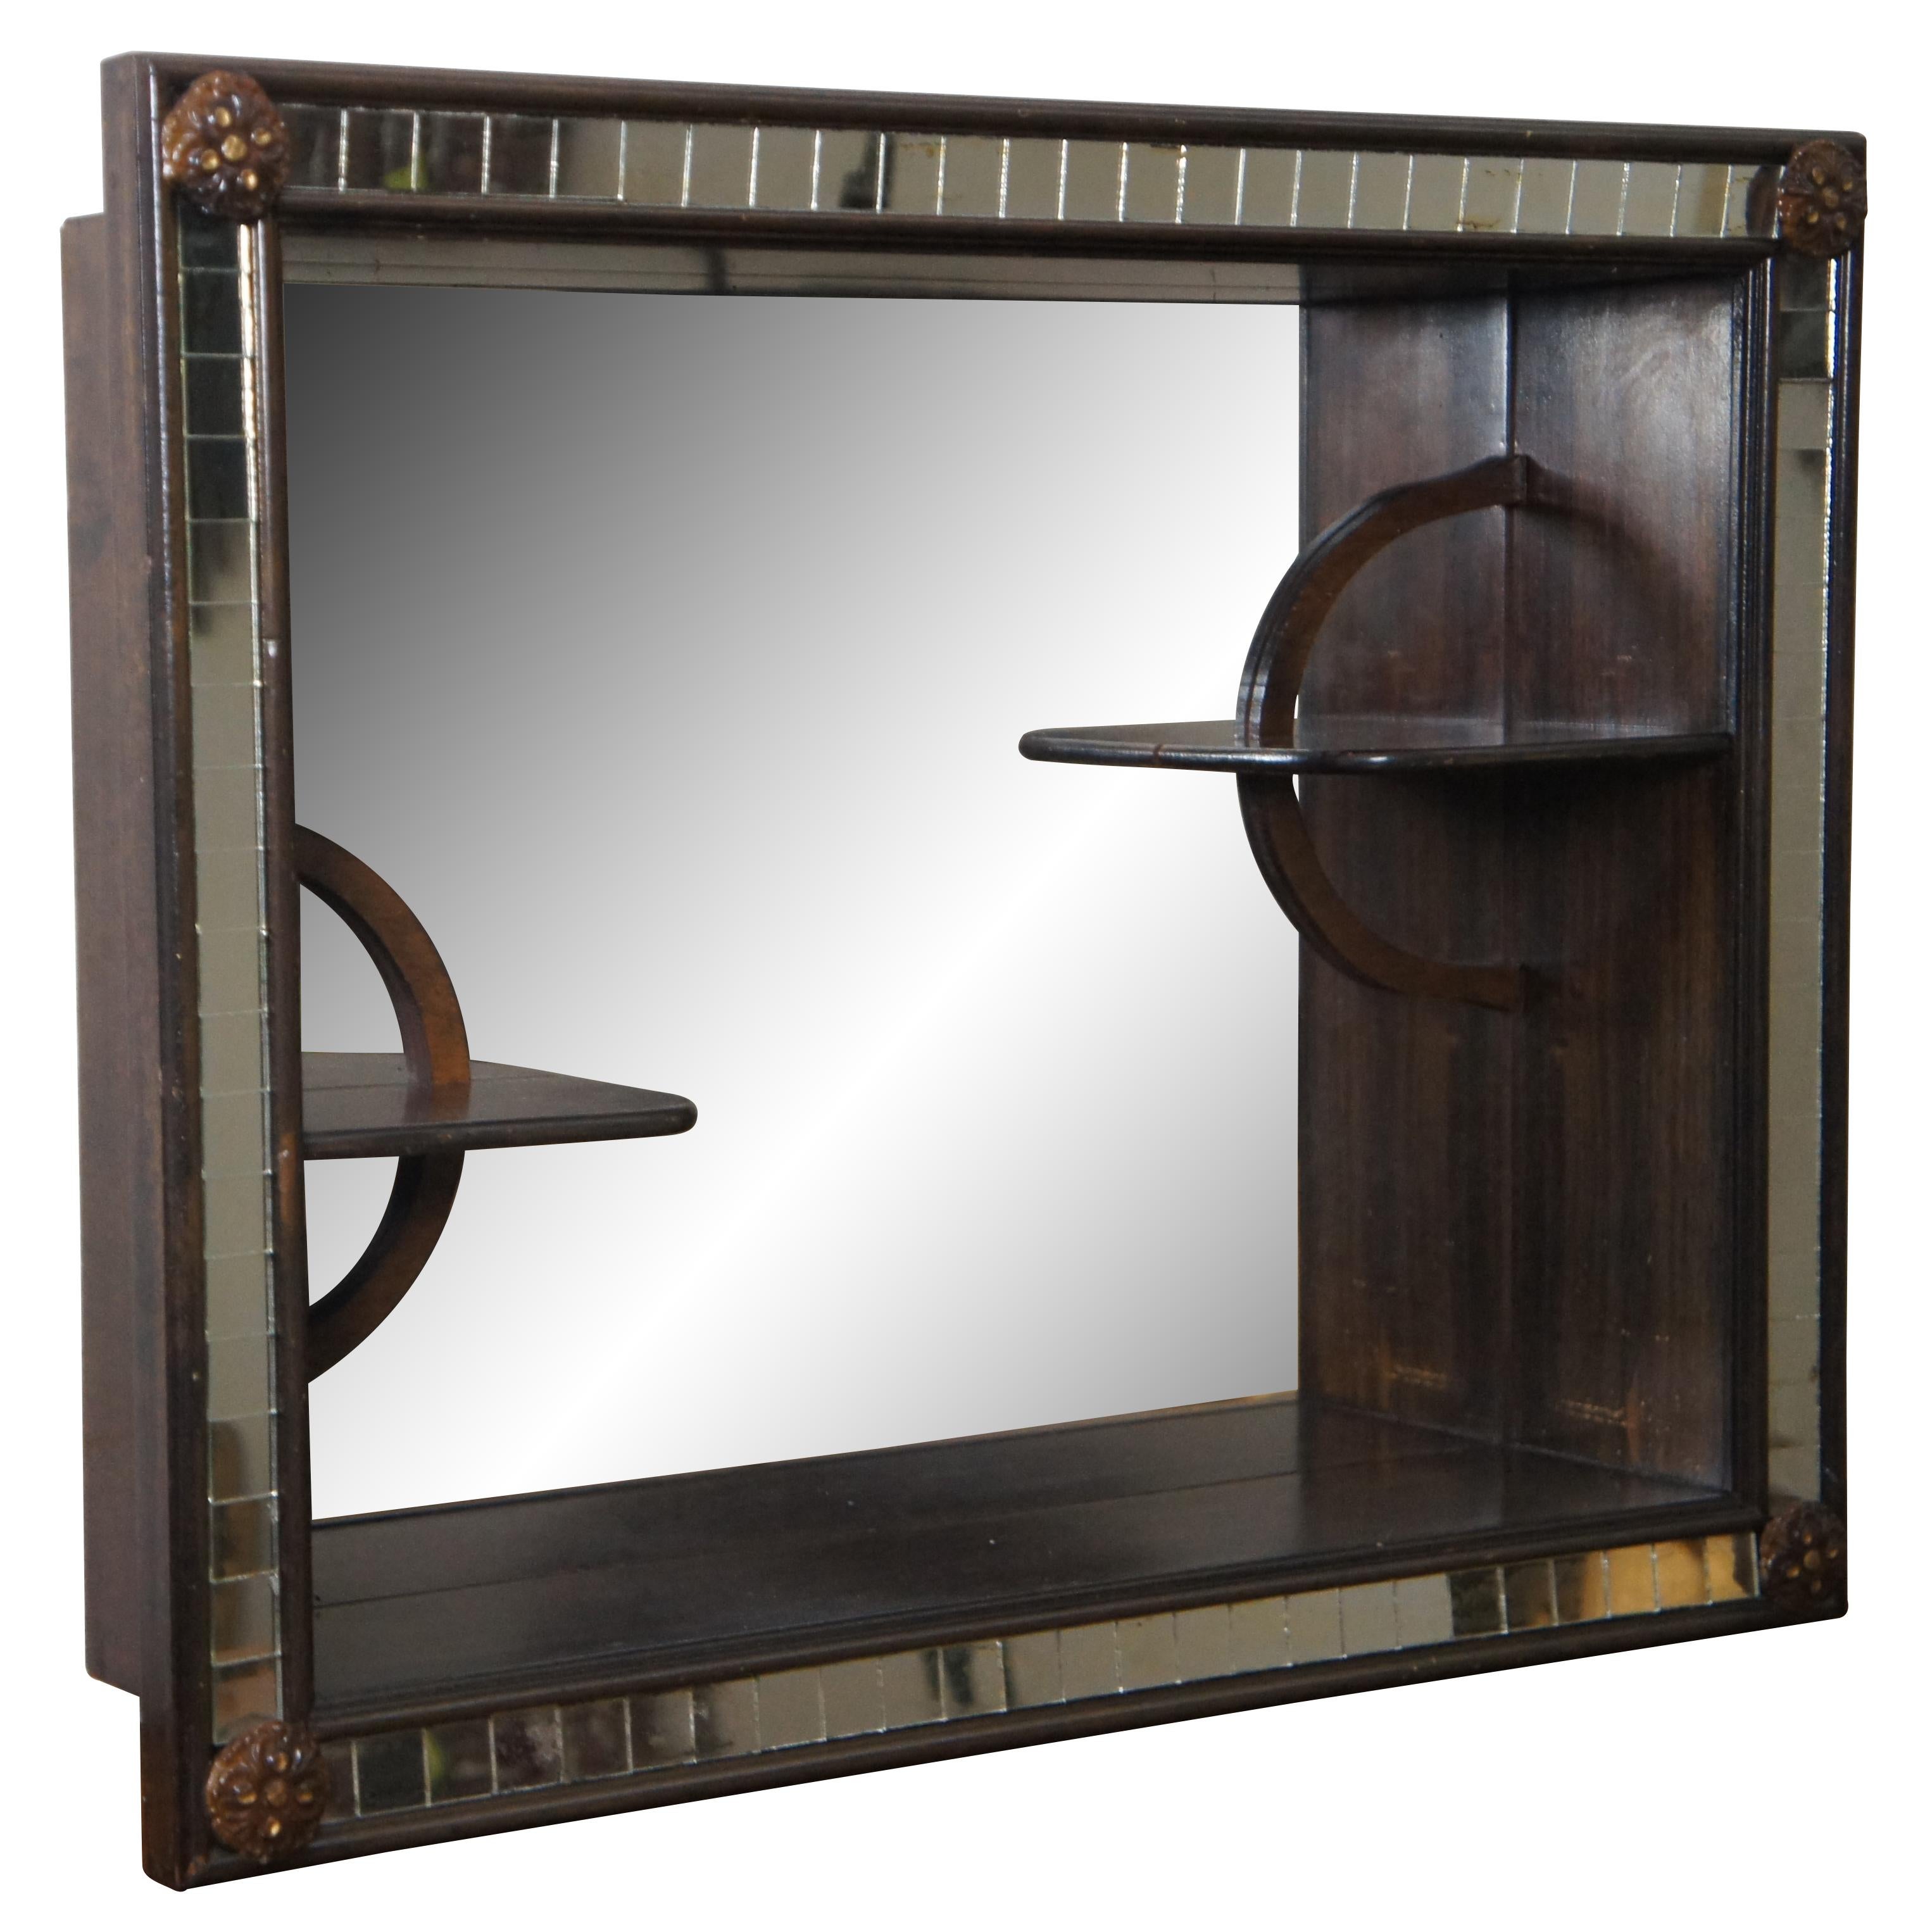 Vintage wooden wall hanging shadowbox shelf featuring a mirrored back accented with a pair of smaller offset shelves and framed with square mirror tiles and floral medallions at the corners. circa mid 20th century. Stamped 227 on back.